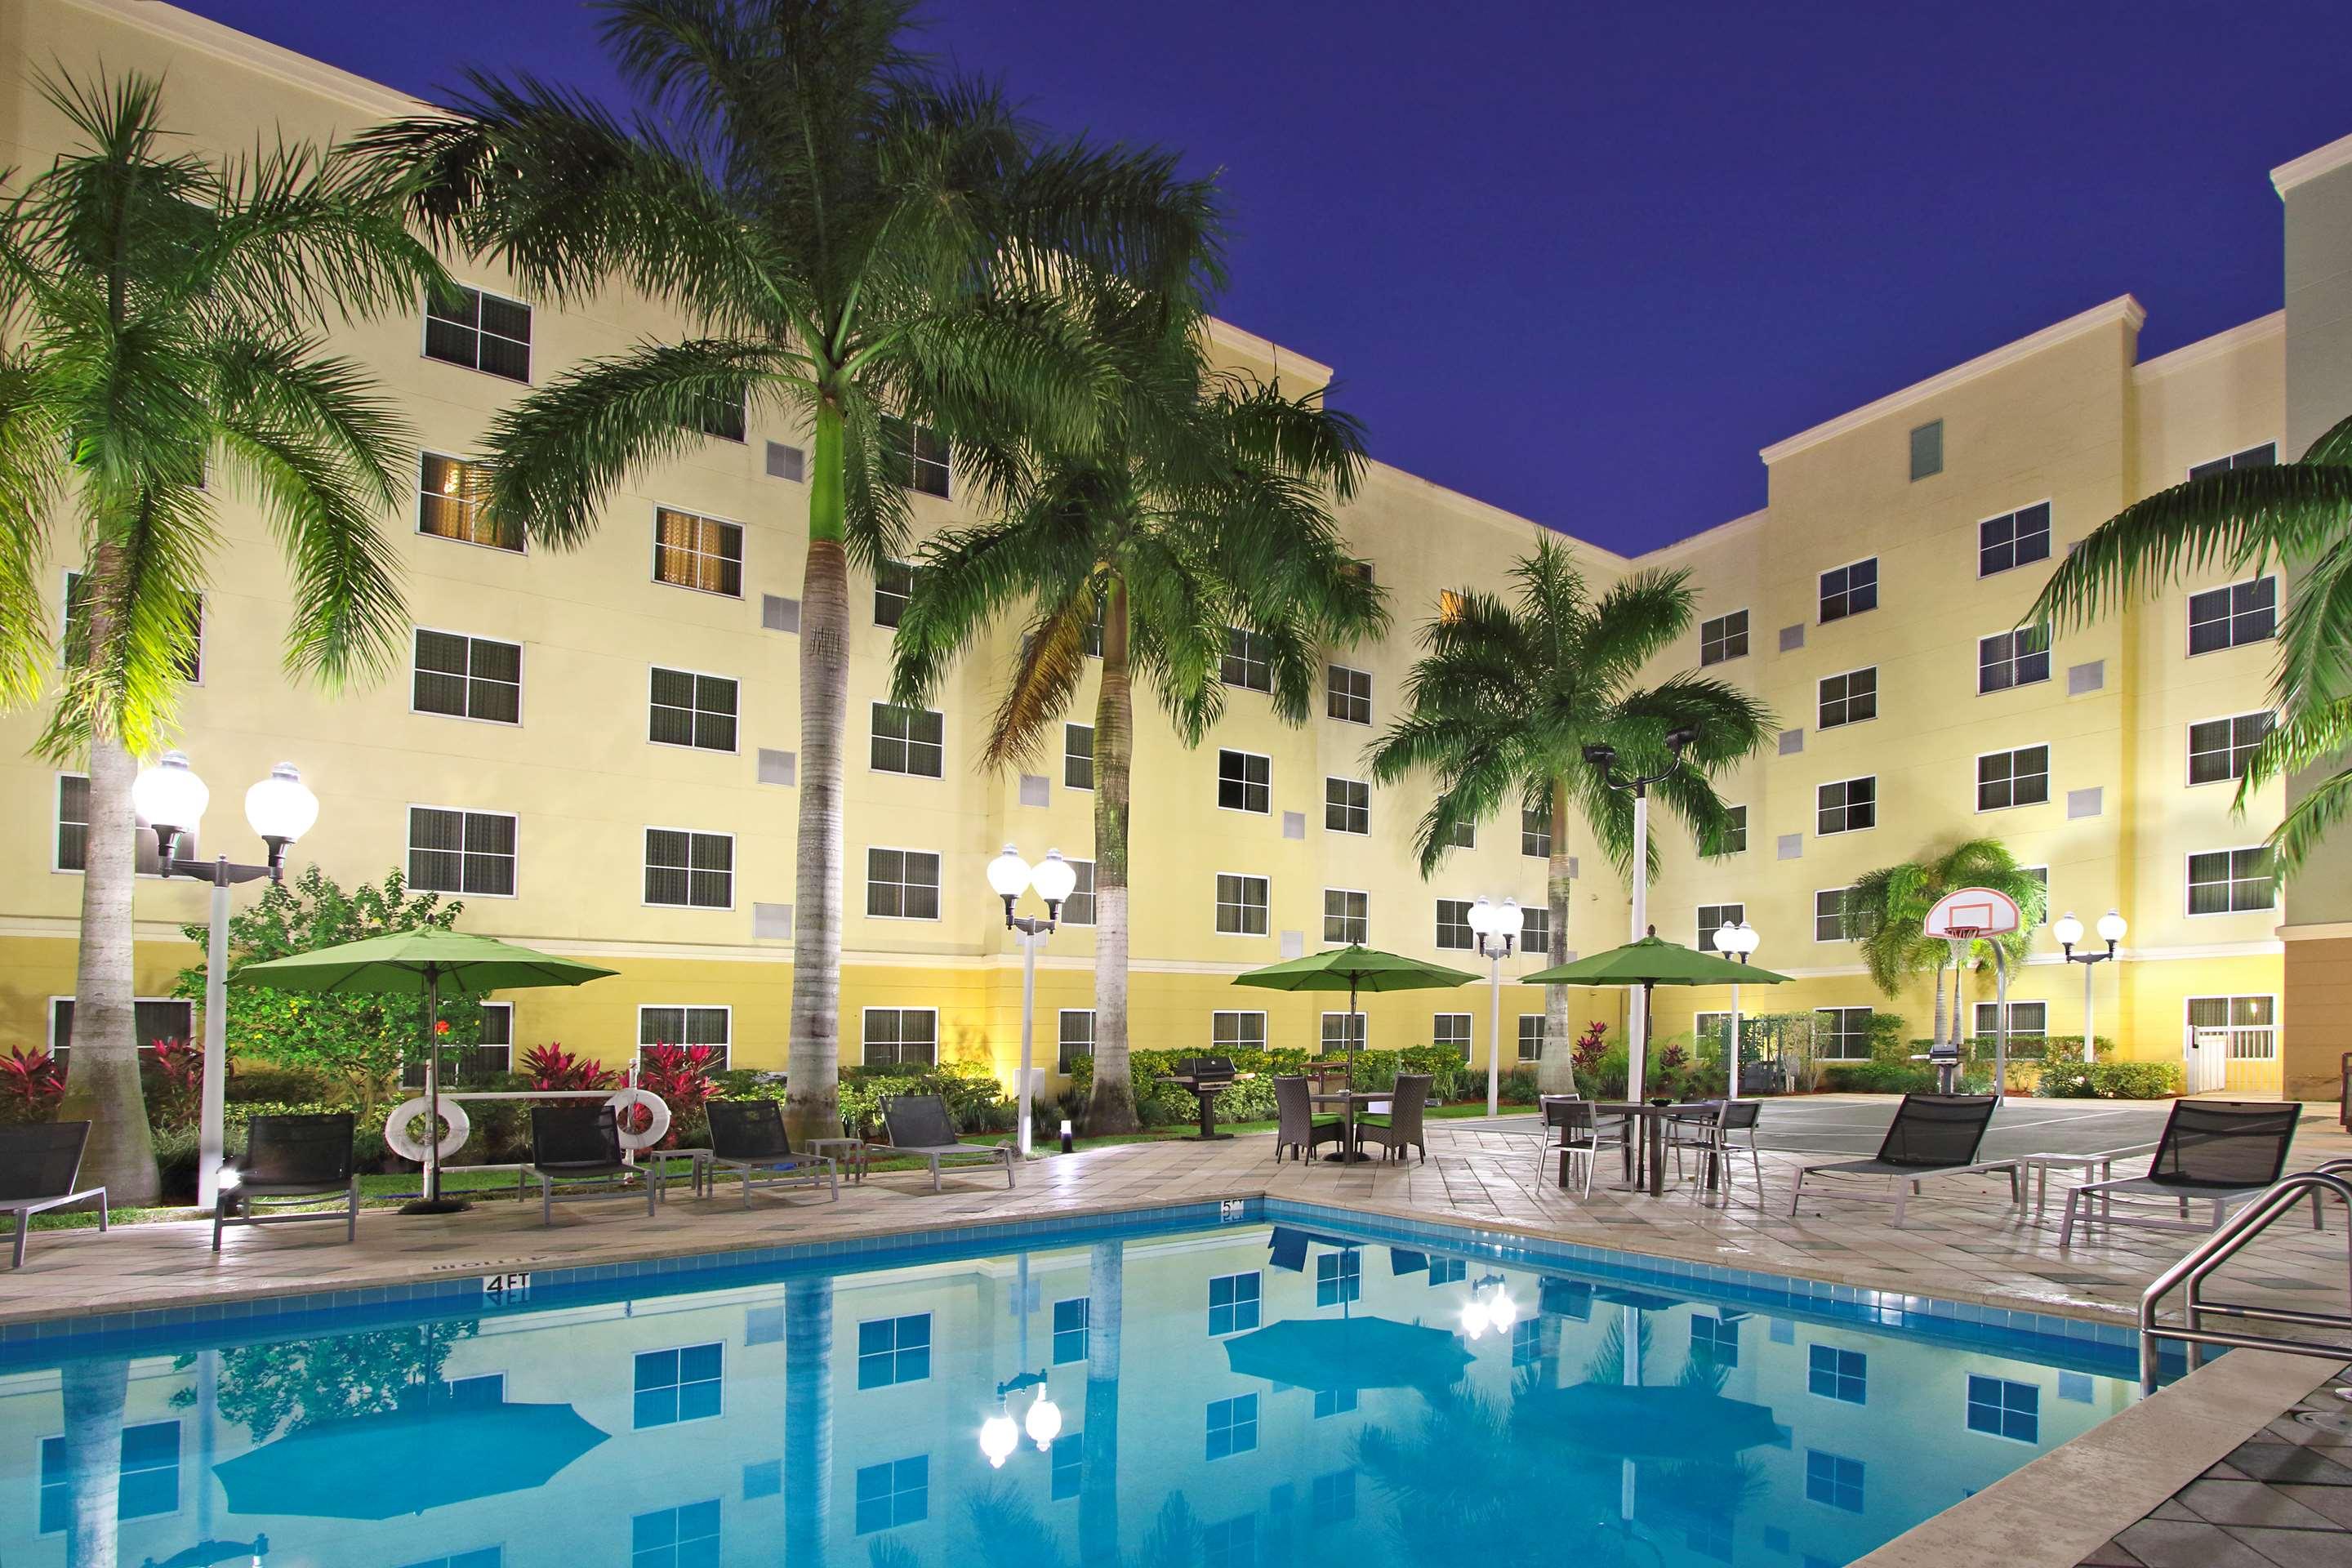 HOMEWOOD SUITES BY HILTON MIAMI DOLPHIN MALL MIAMI: LOW RATES